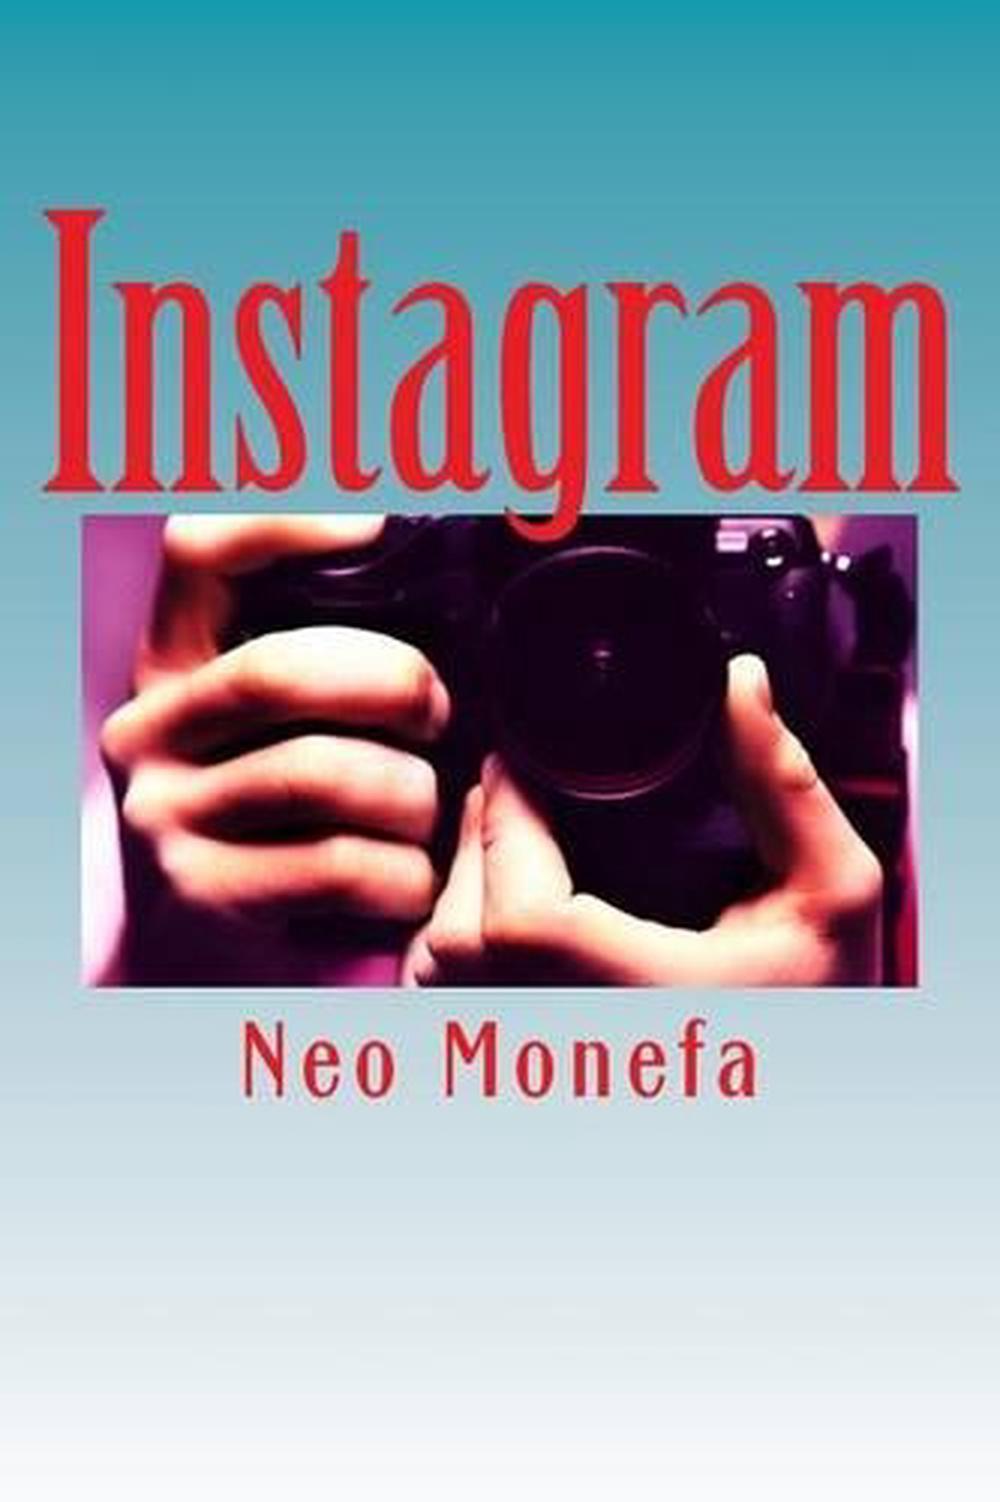 instagram insider tips and secrets on how to gain followers and likes that work fast - secret to gain followers on instagram